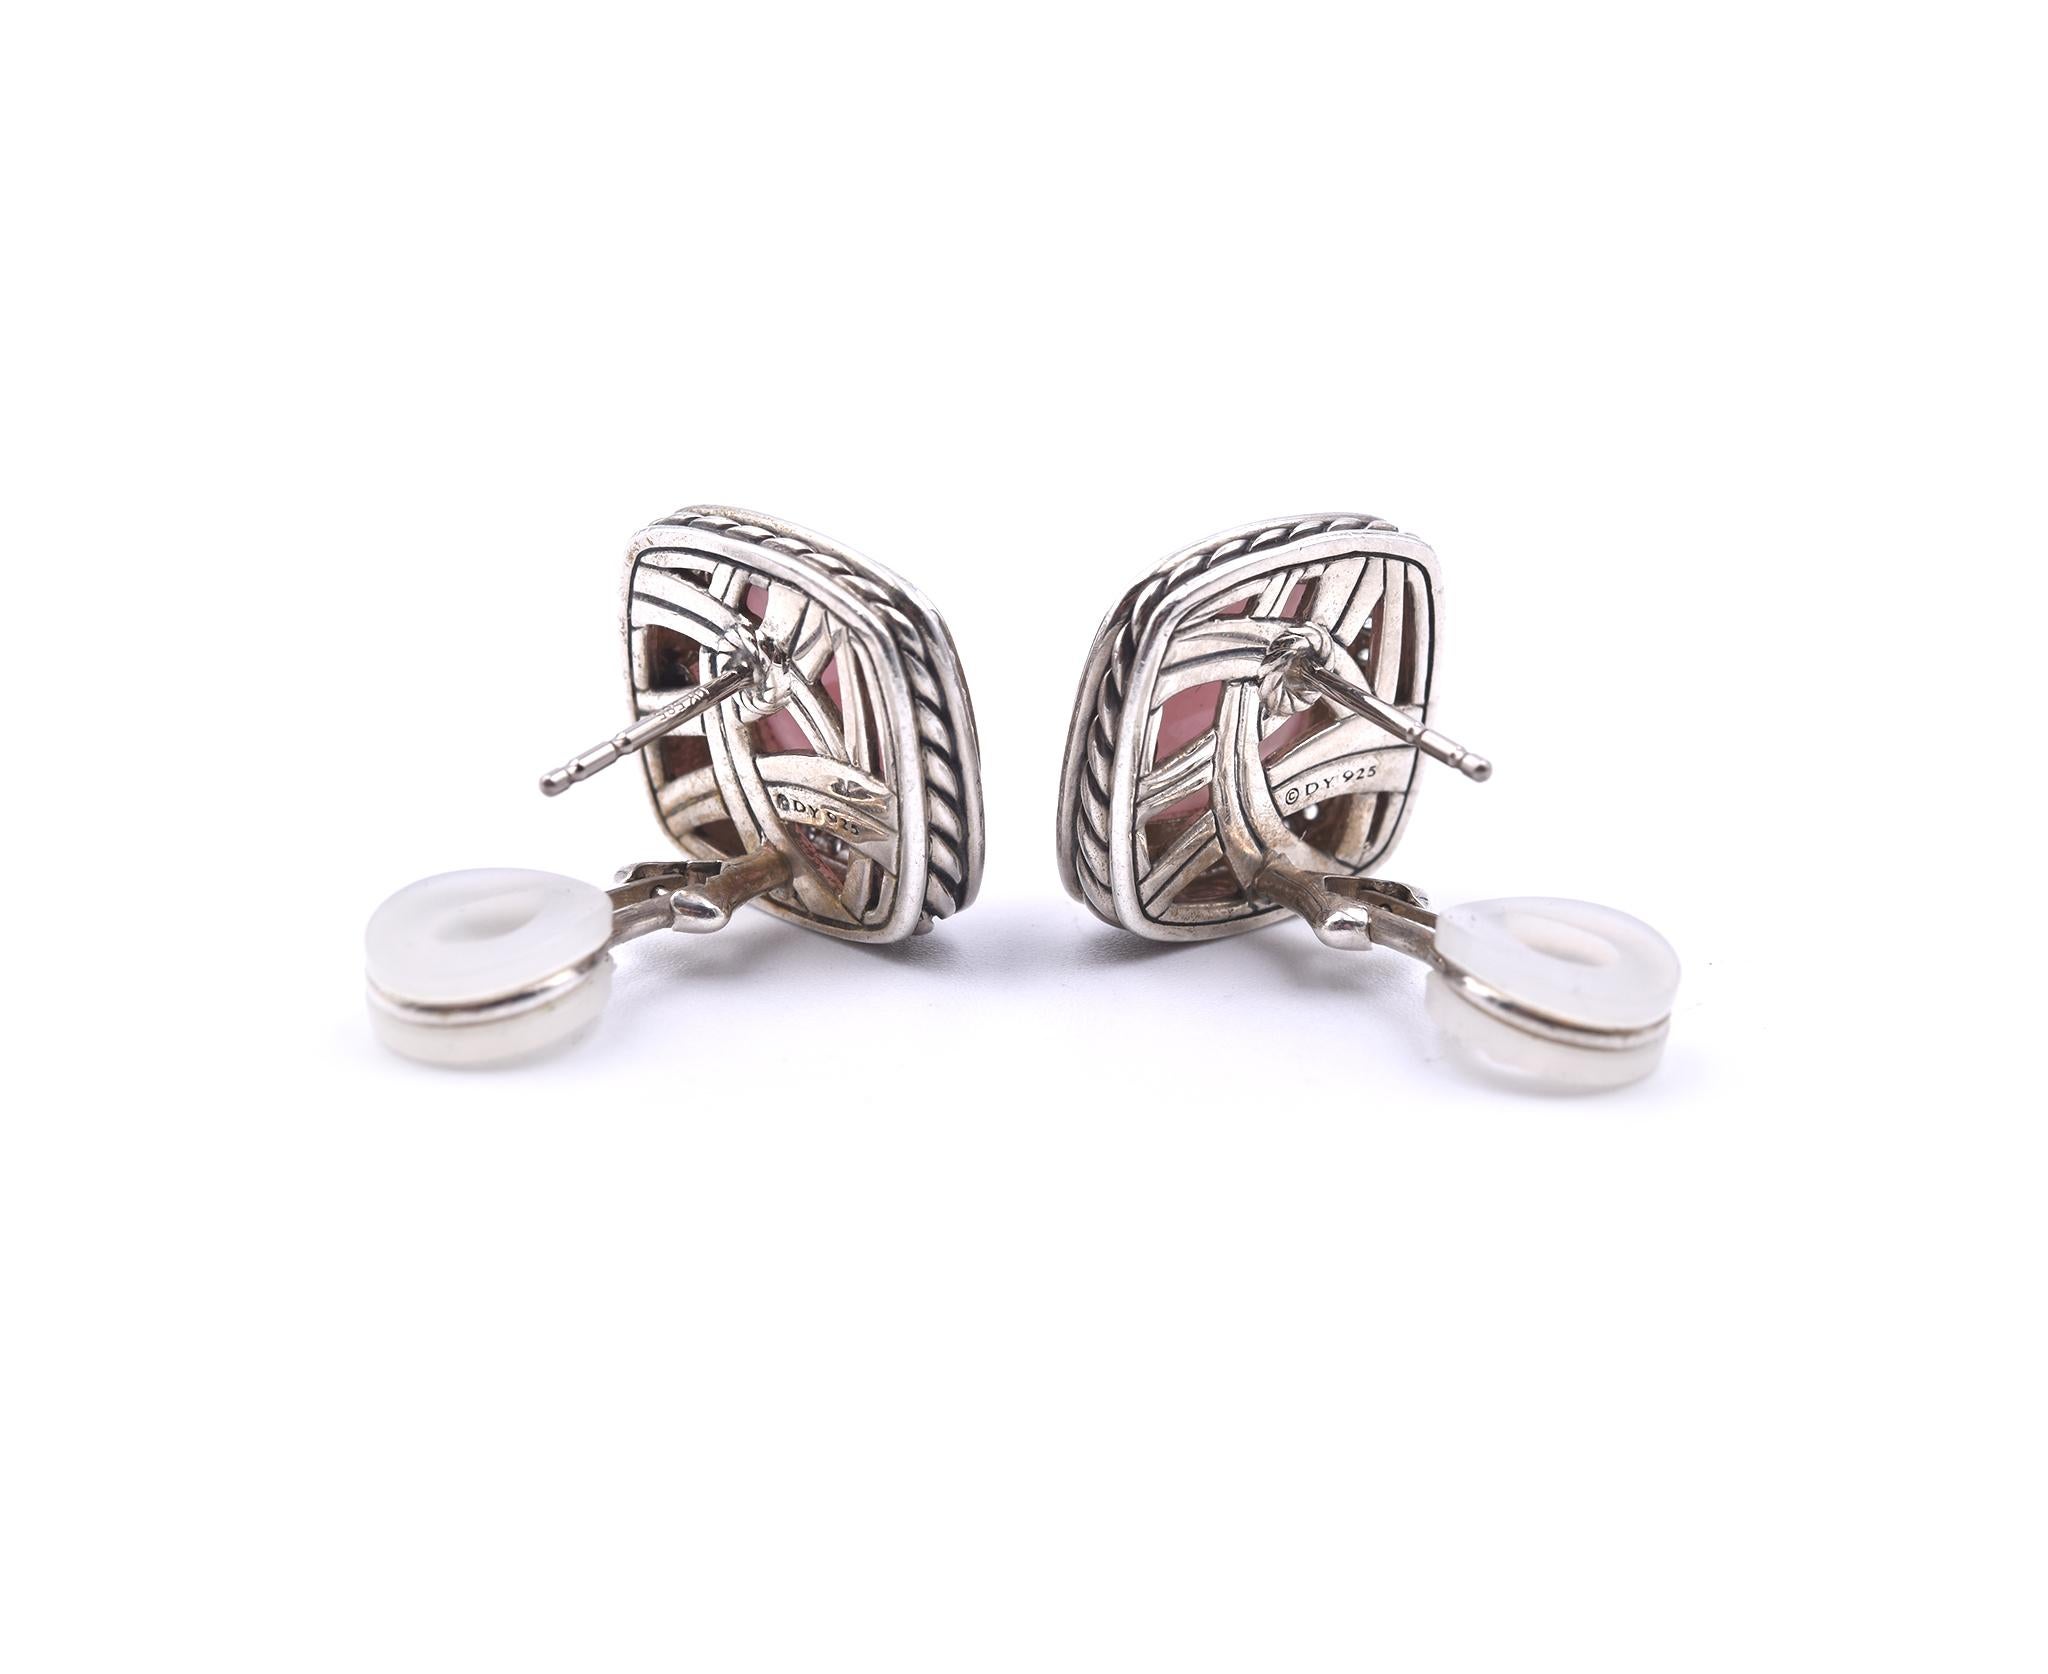 Designer: David Yurman
Material: sterling silver 
Diamonds: = .50cttw
Color: G
Clarity: VS
Dimensions: earrings are approximately 16.50mm by 16.34mm
Fastening: post with omega backs
Weight: 11.49 grams
Retail: $1,650